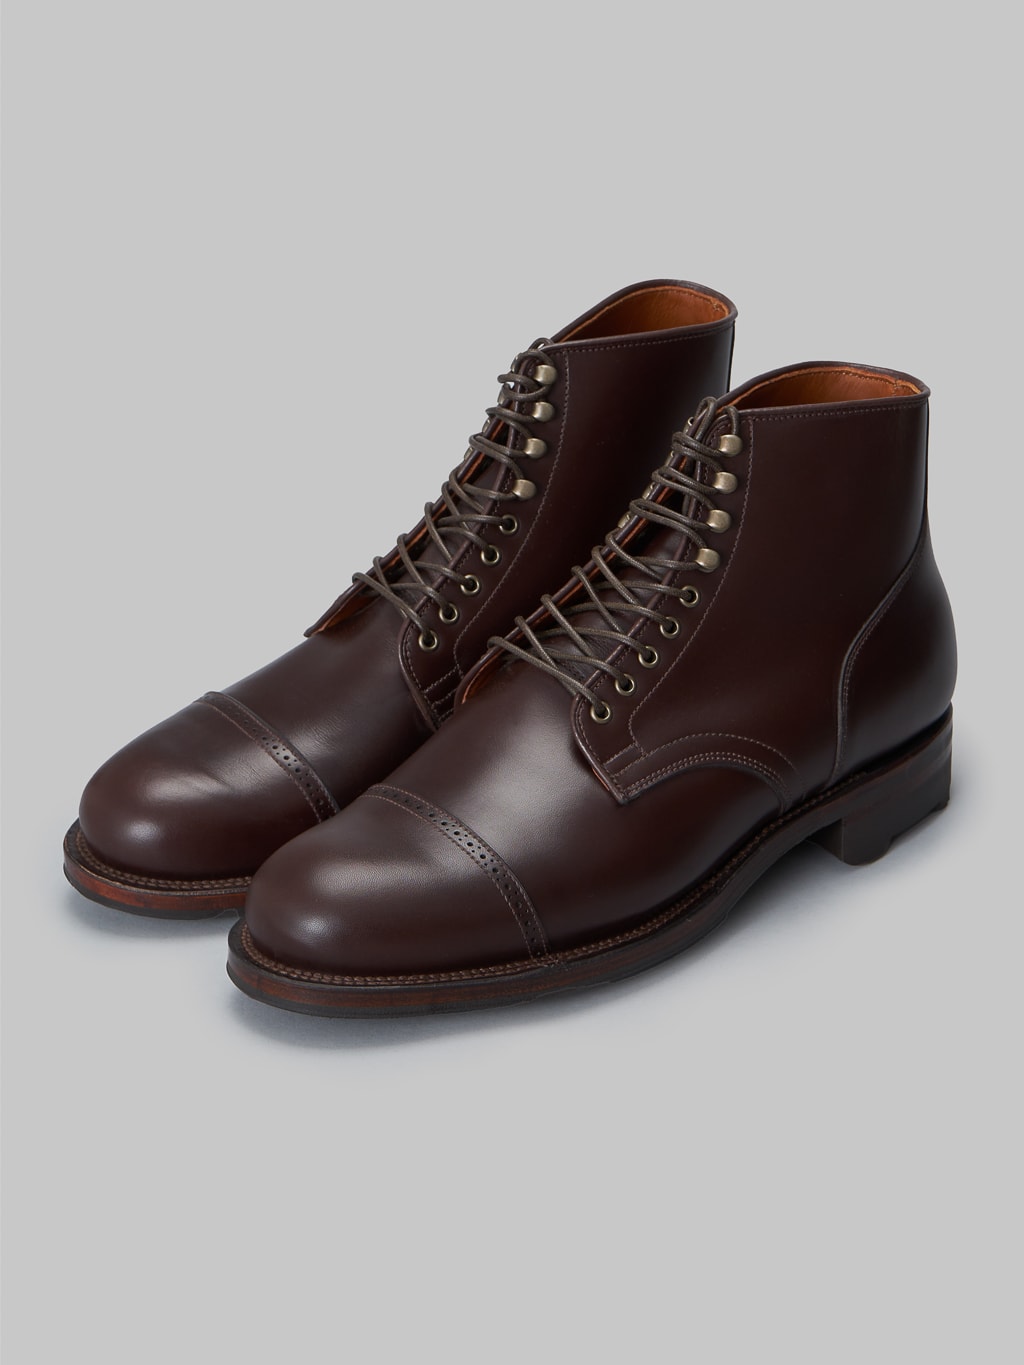 Viberg Service Boot 2030 Annonay Vocalau Warm Brown French Calf  toe